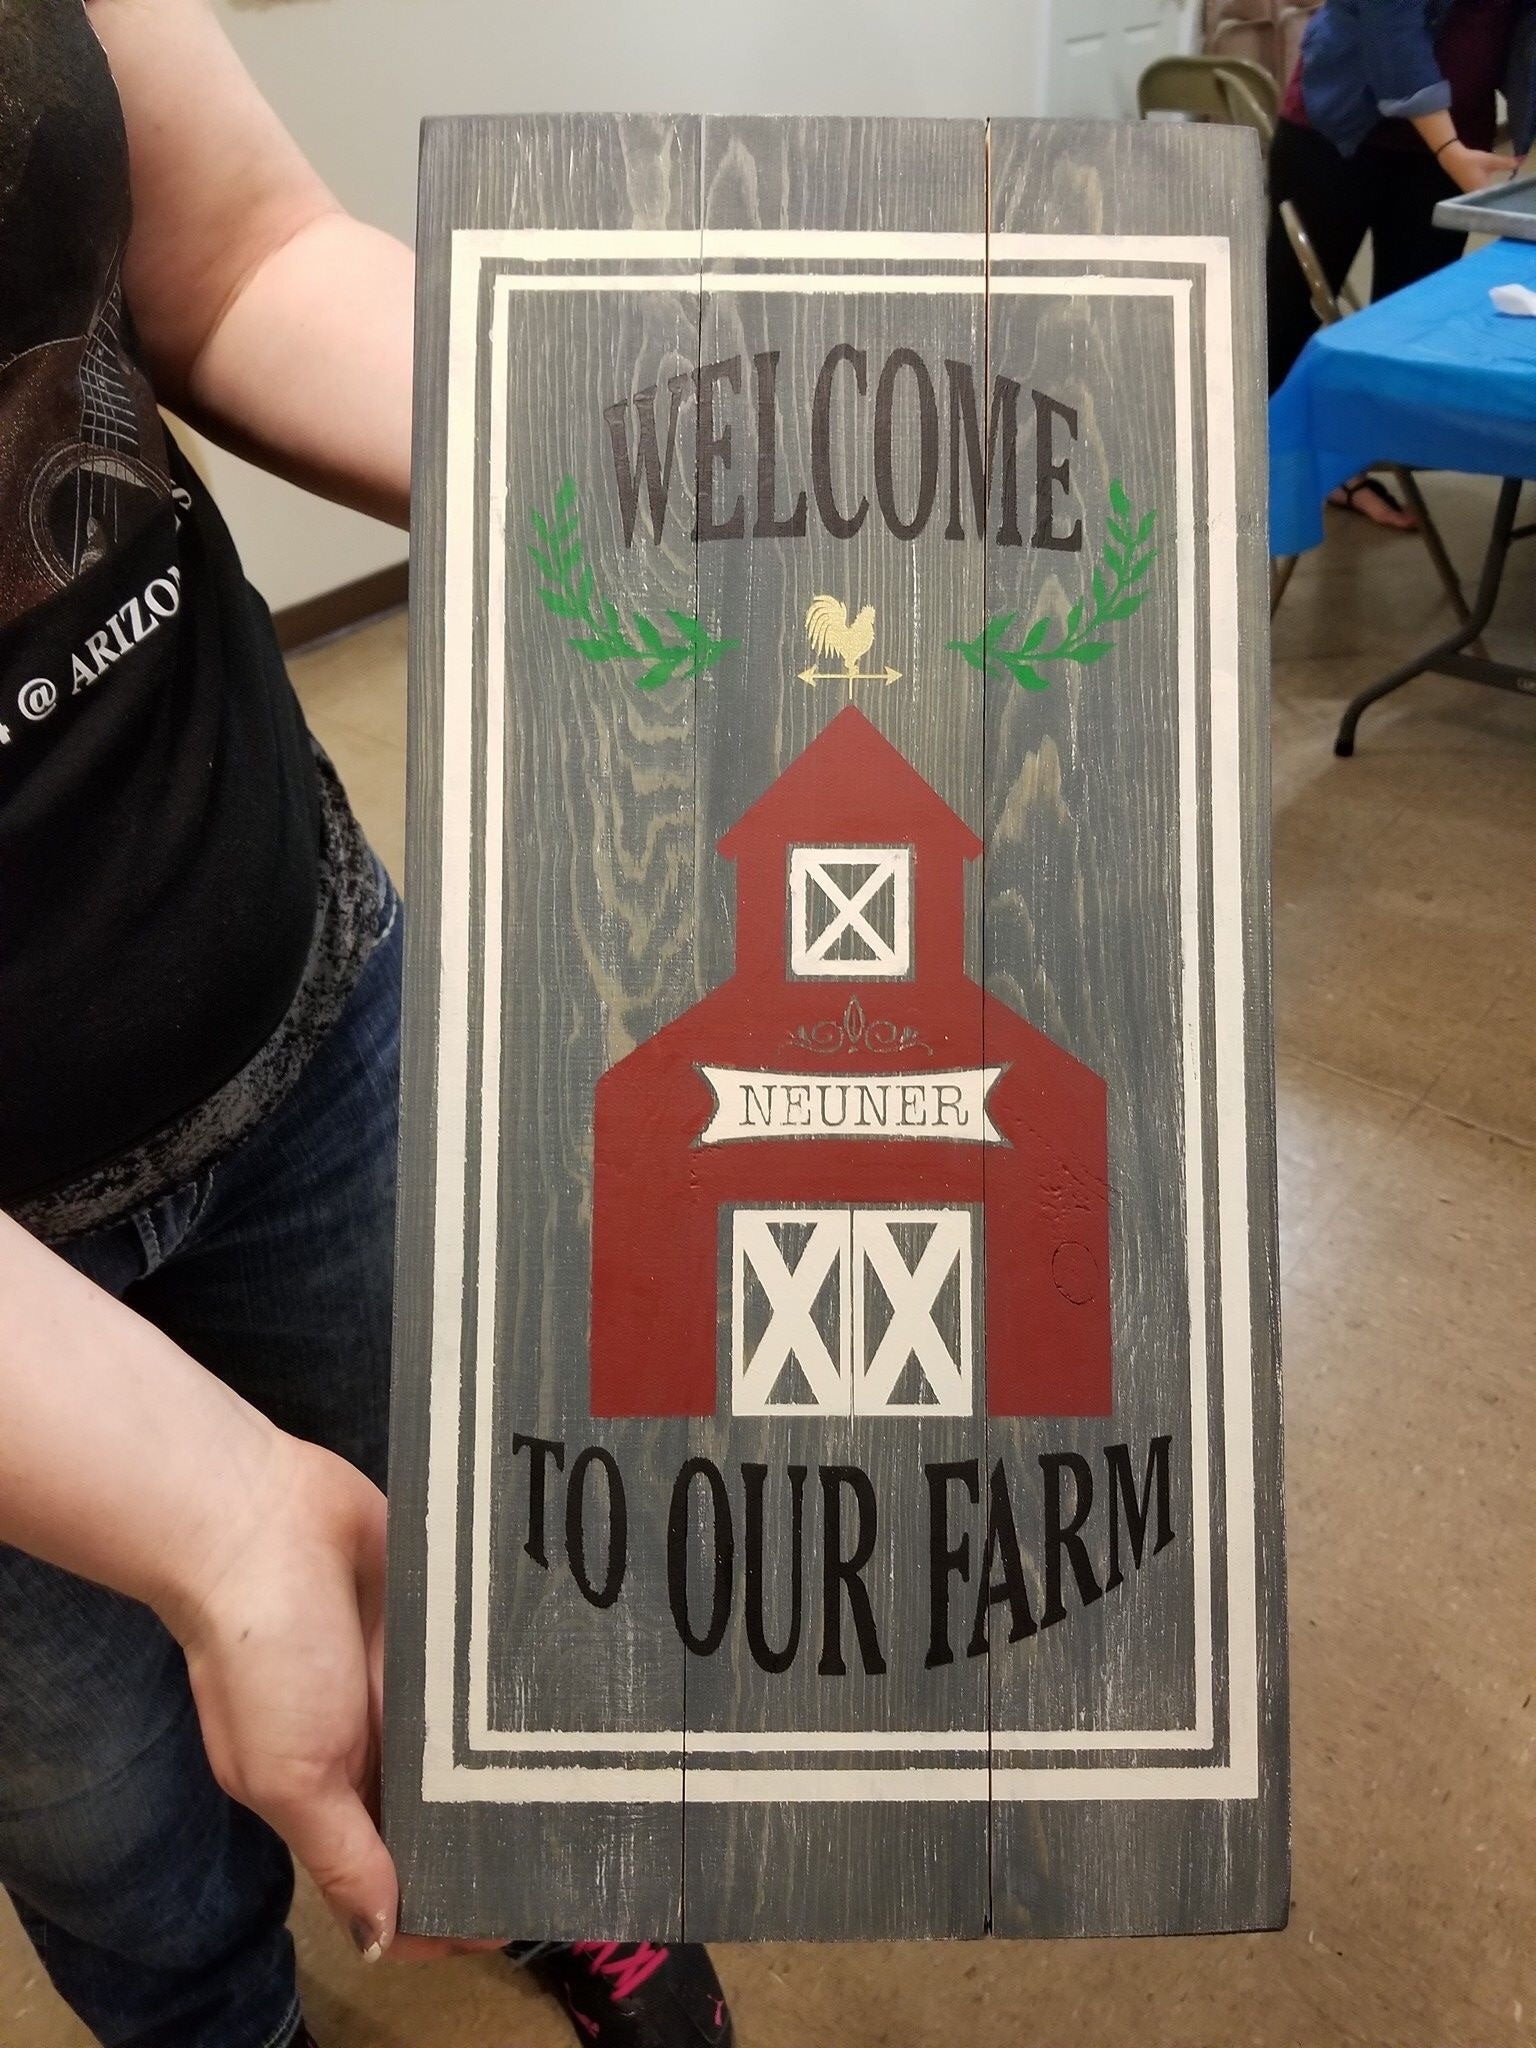 Welcome to our farm-last name